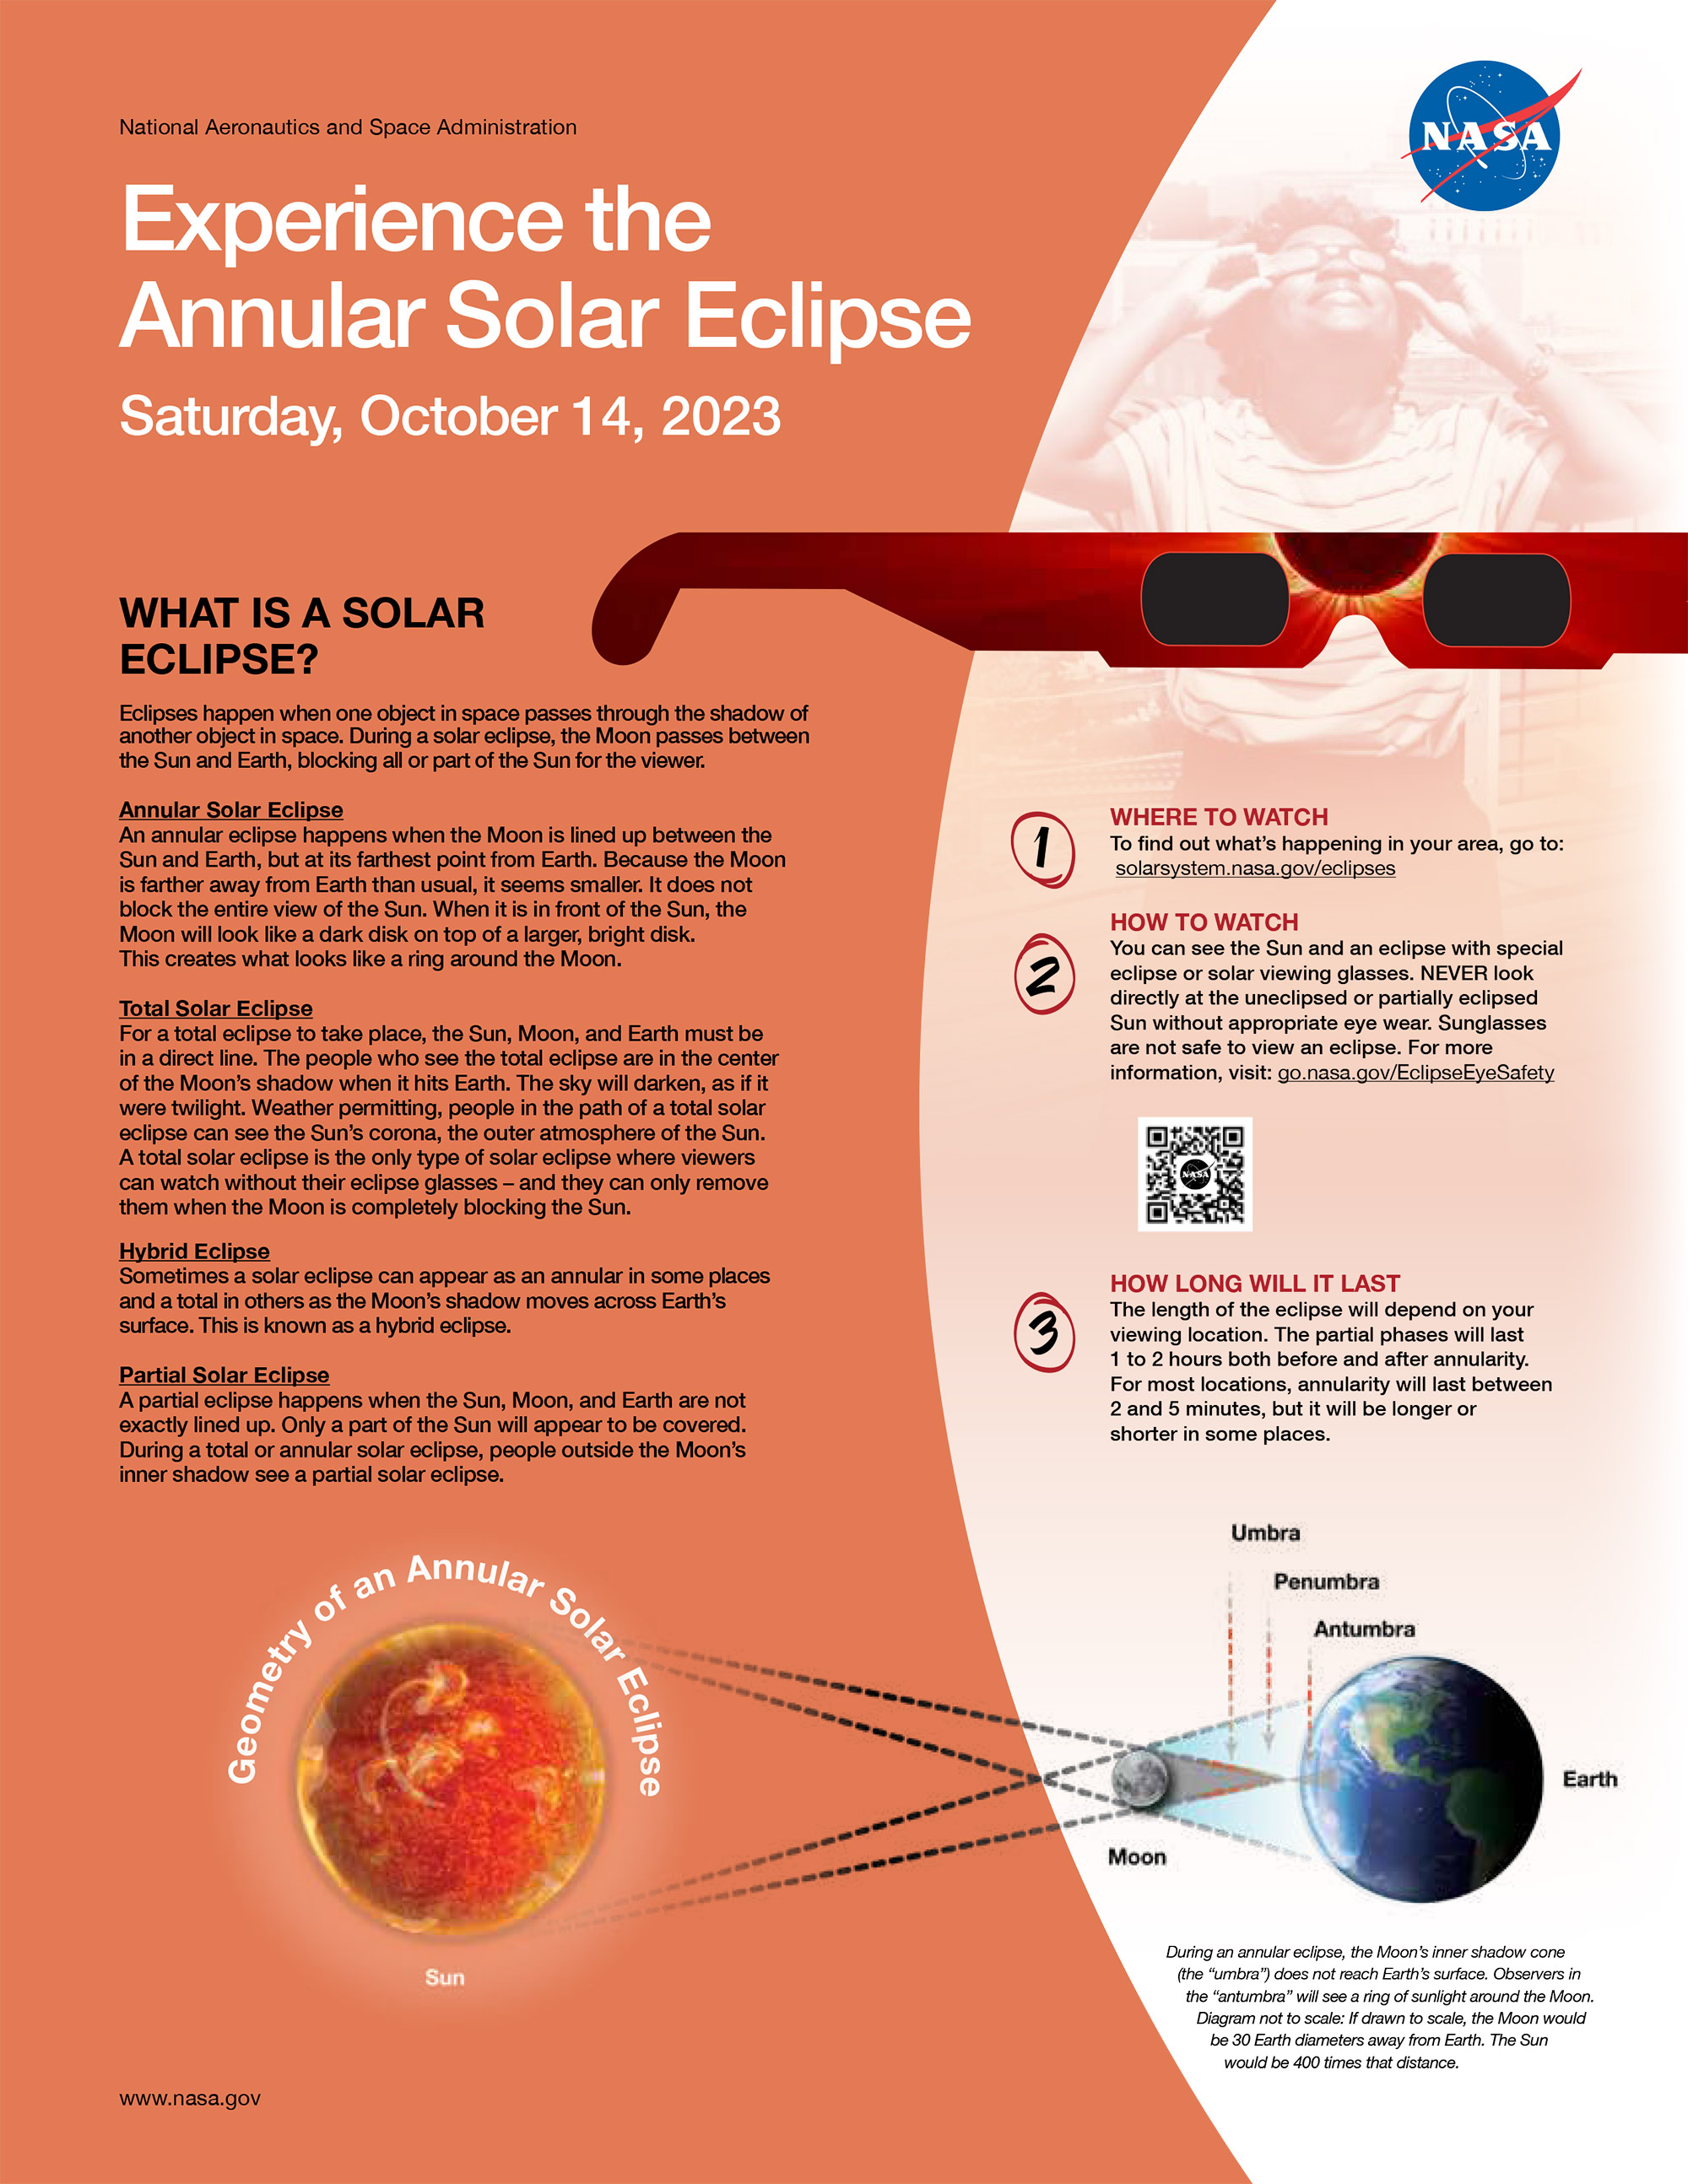 An orange fact sheet showing information about eclipses on the left, including the types of eclipses, and information about where to access the locations on the right.